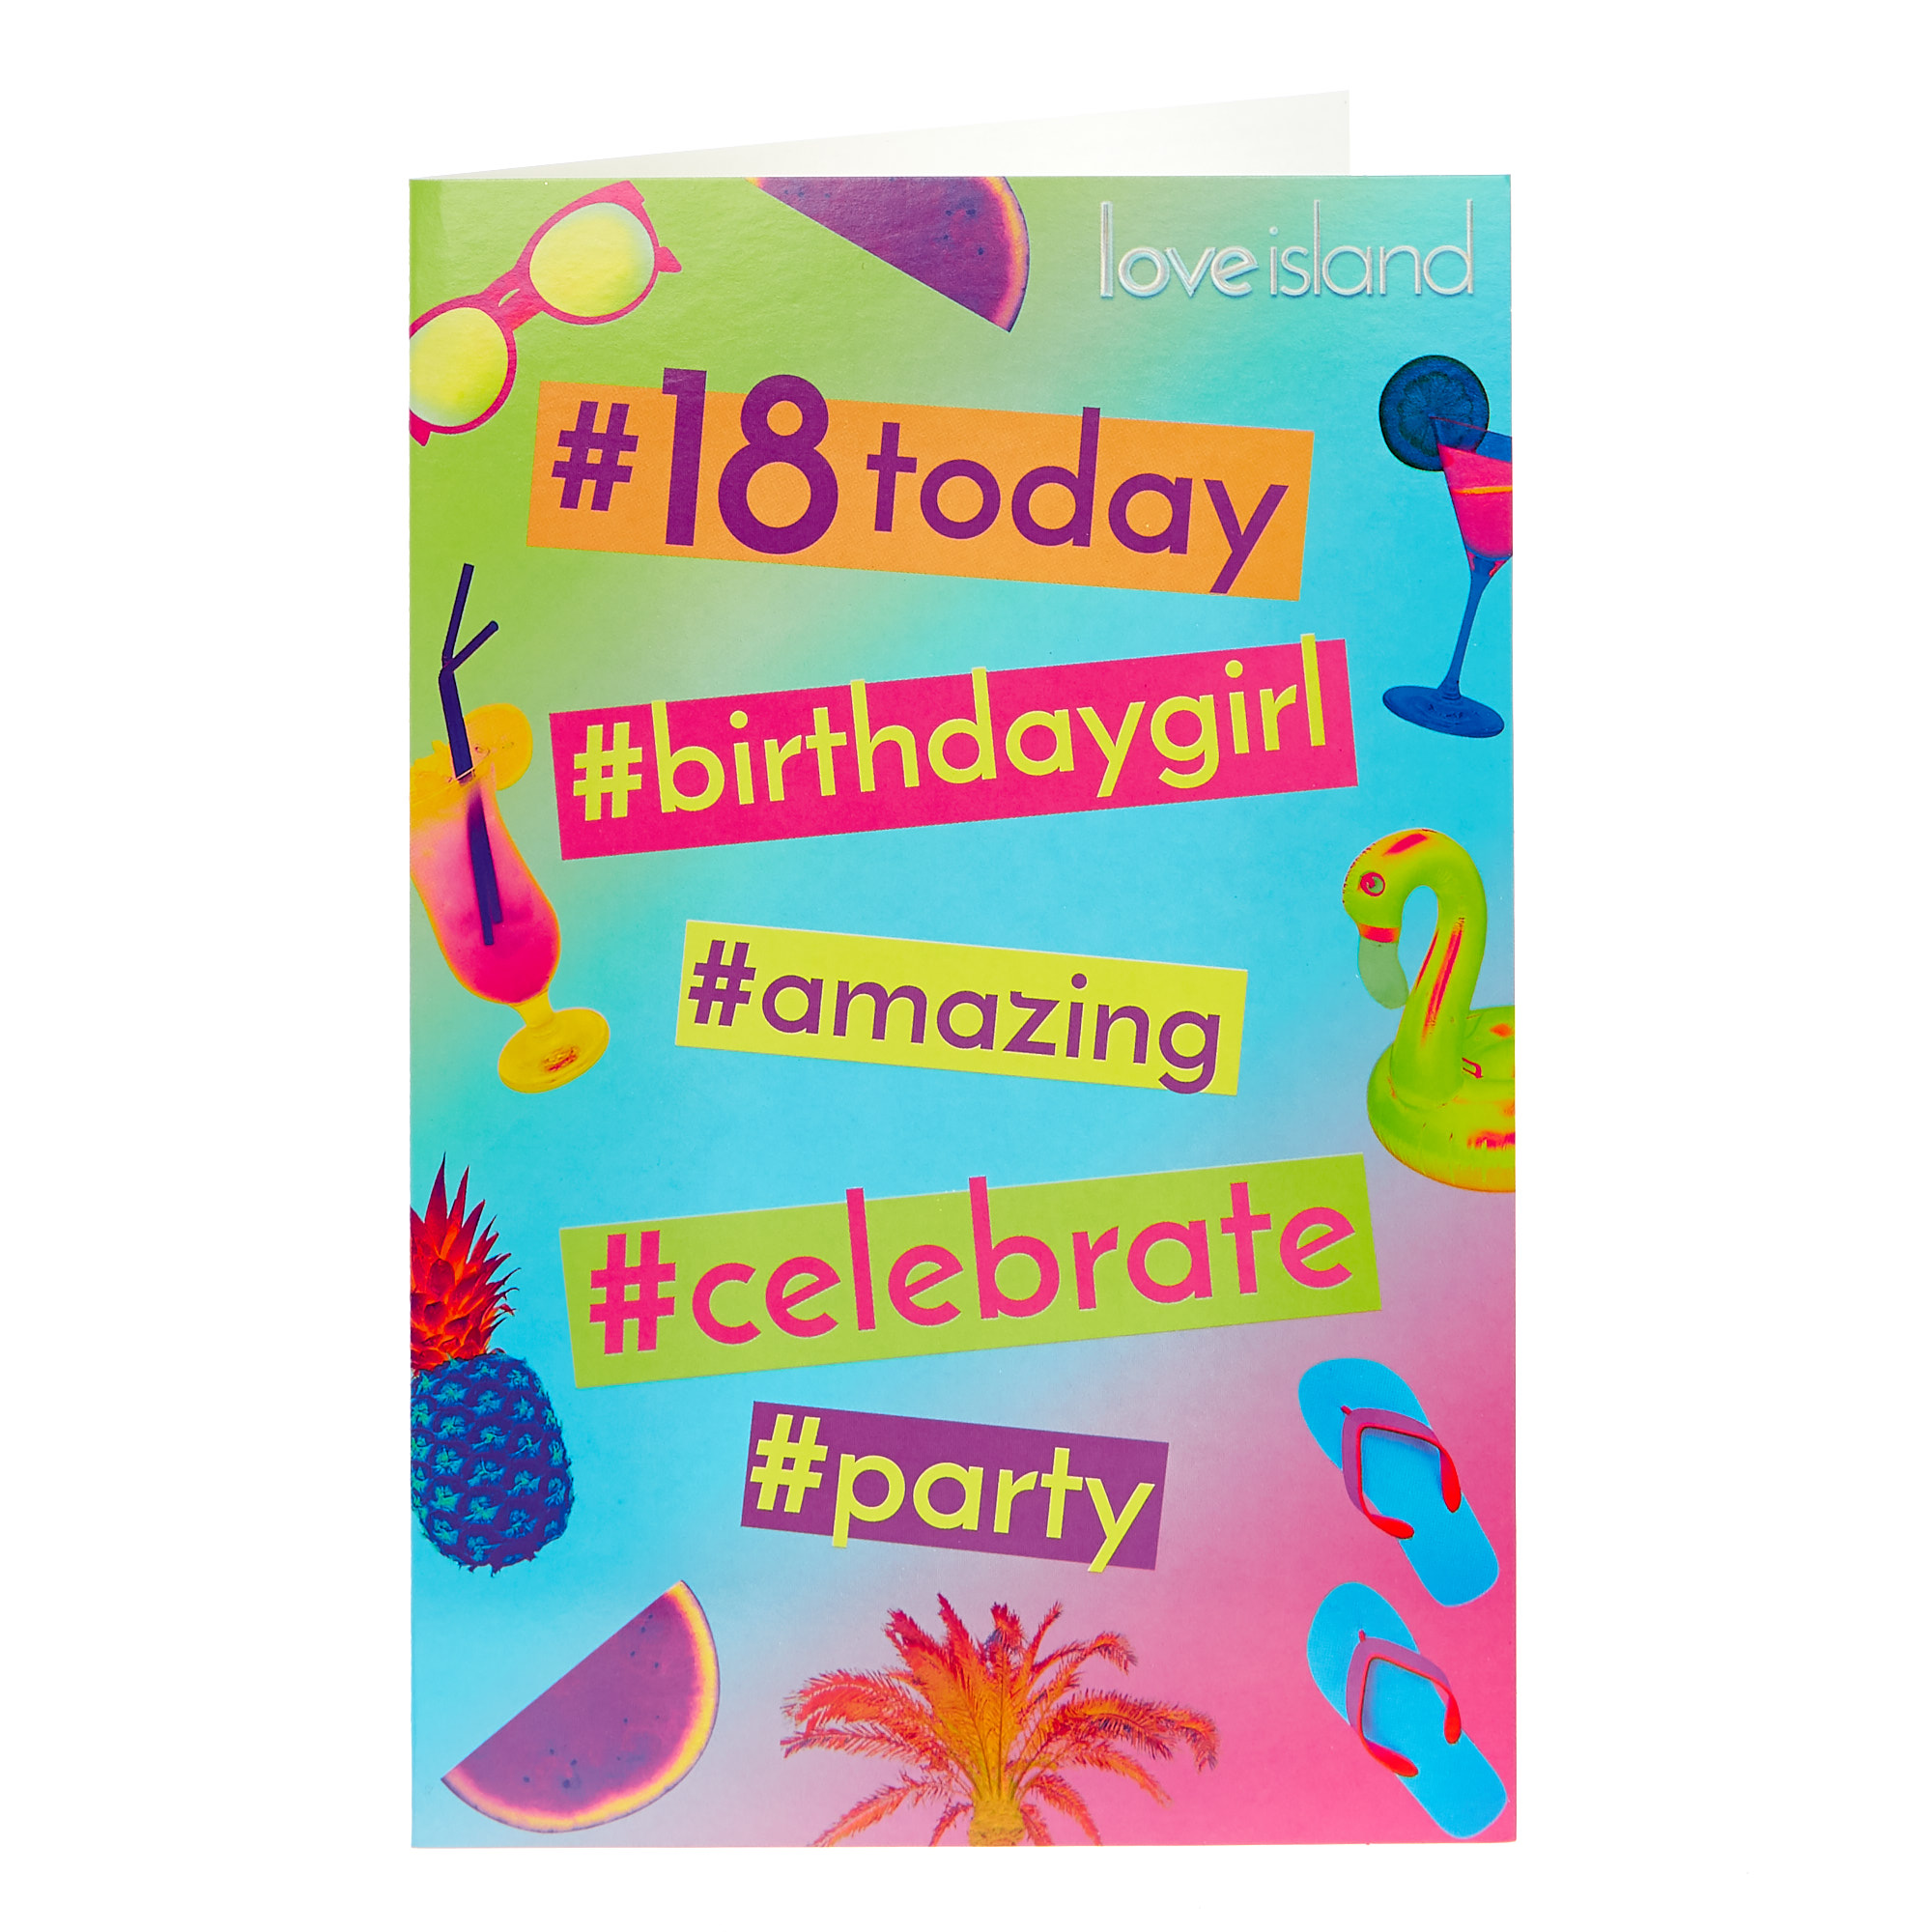 After a year away due to the pandemic, love island is finally back on our screens. Buy Love Island 18th Birthday Card for GBP 0.99 | Card ...